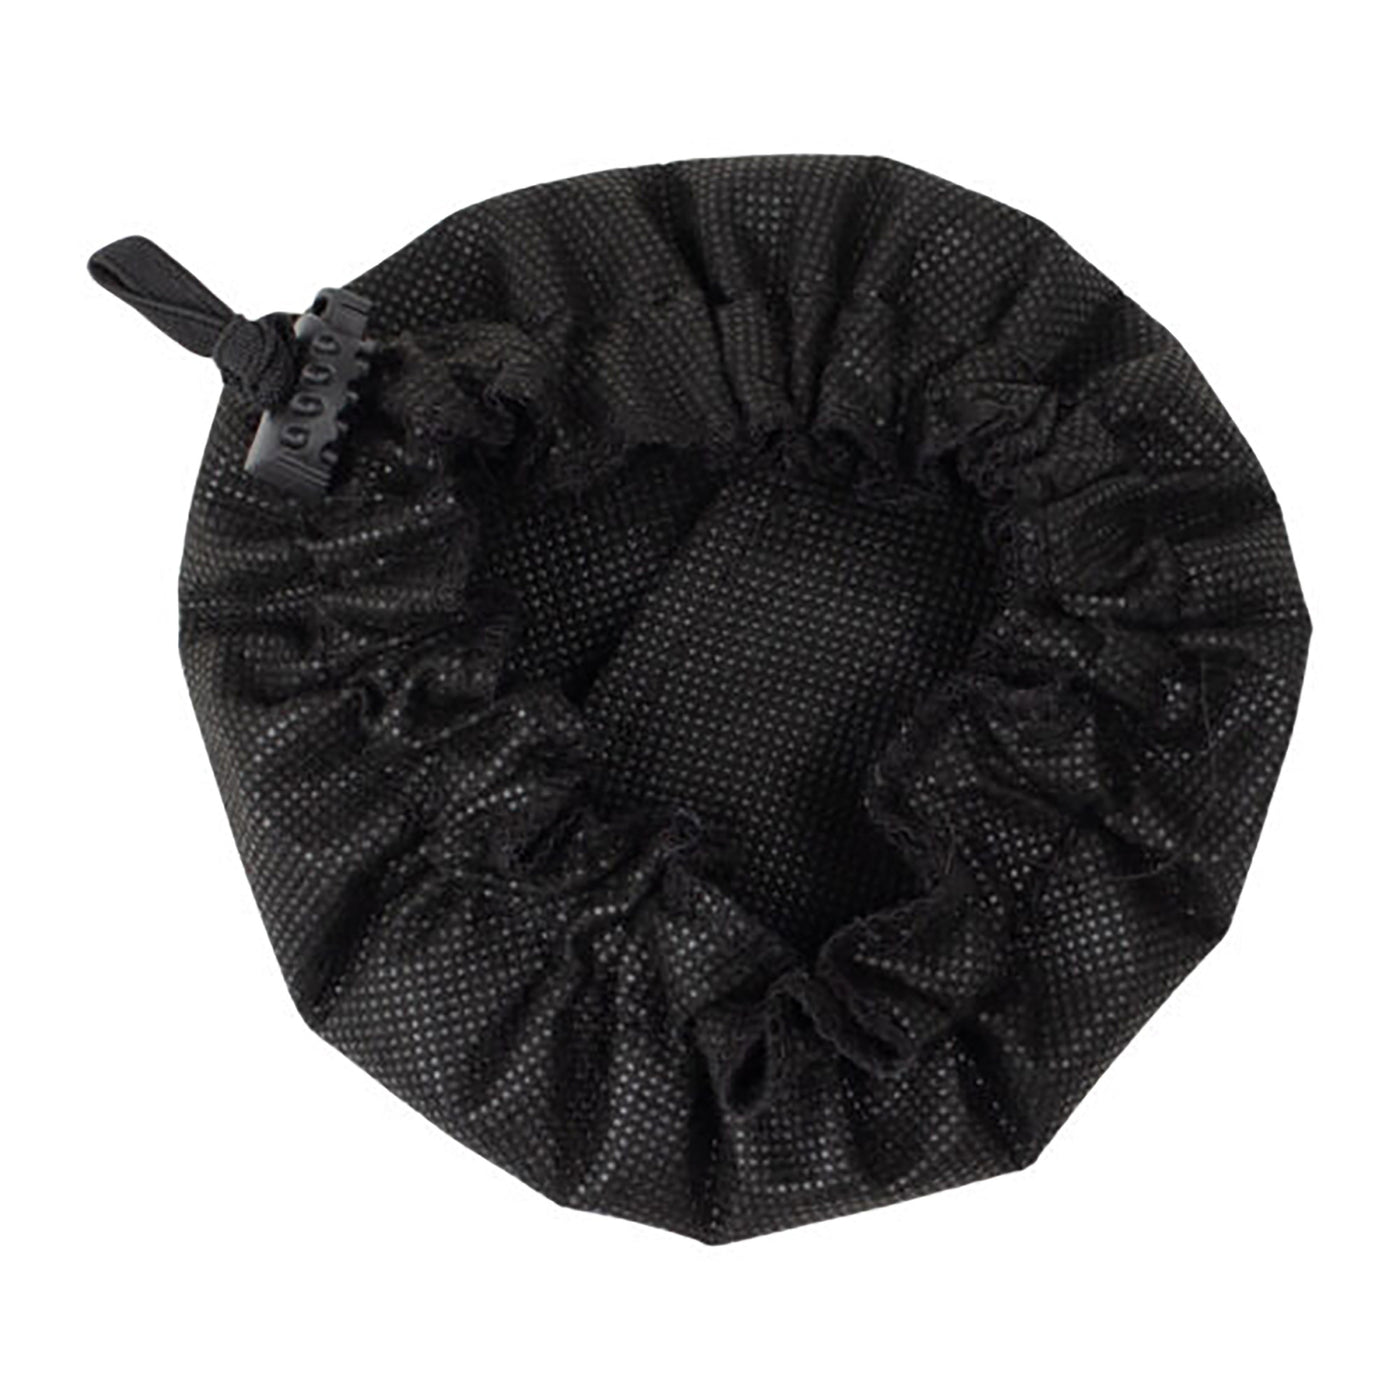 Black Bell Cover With Merv 13 Filter, 2-3 Inches